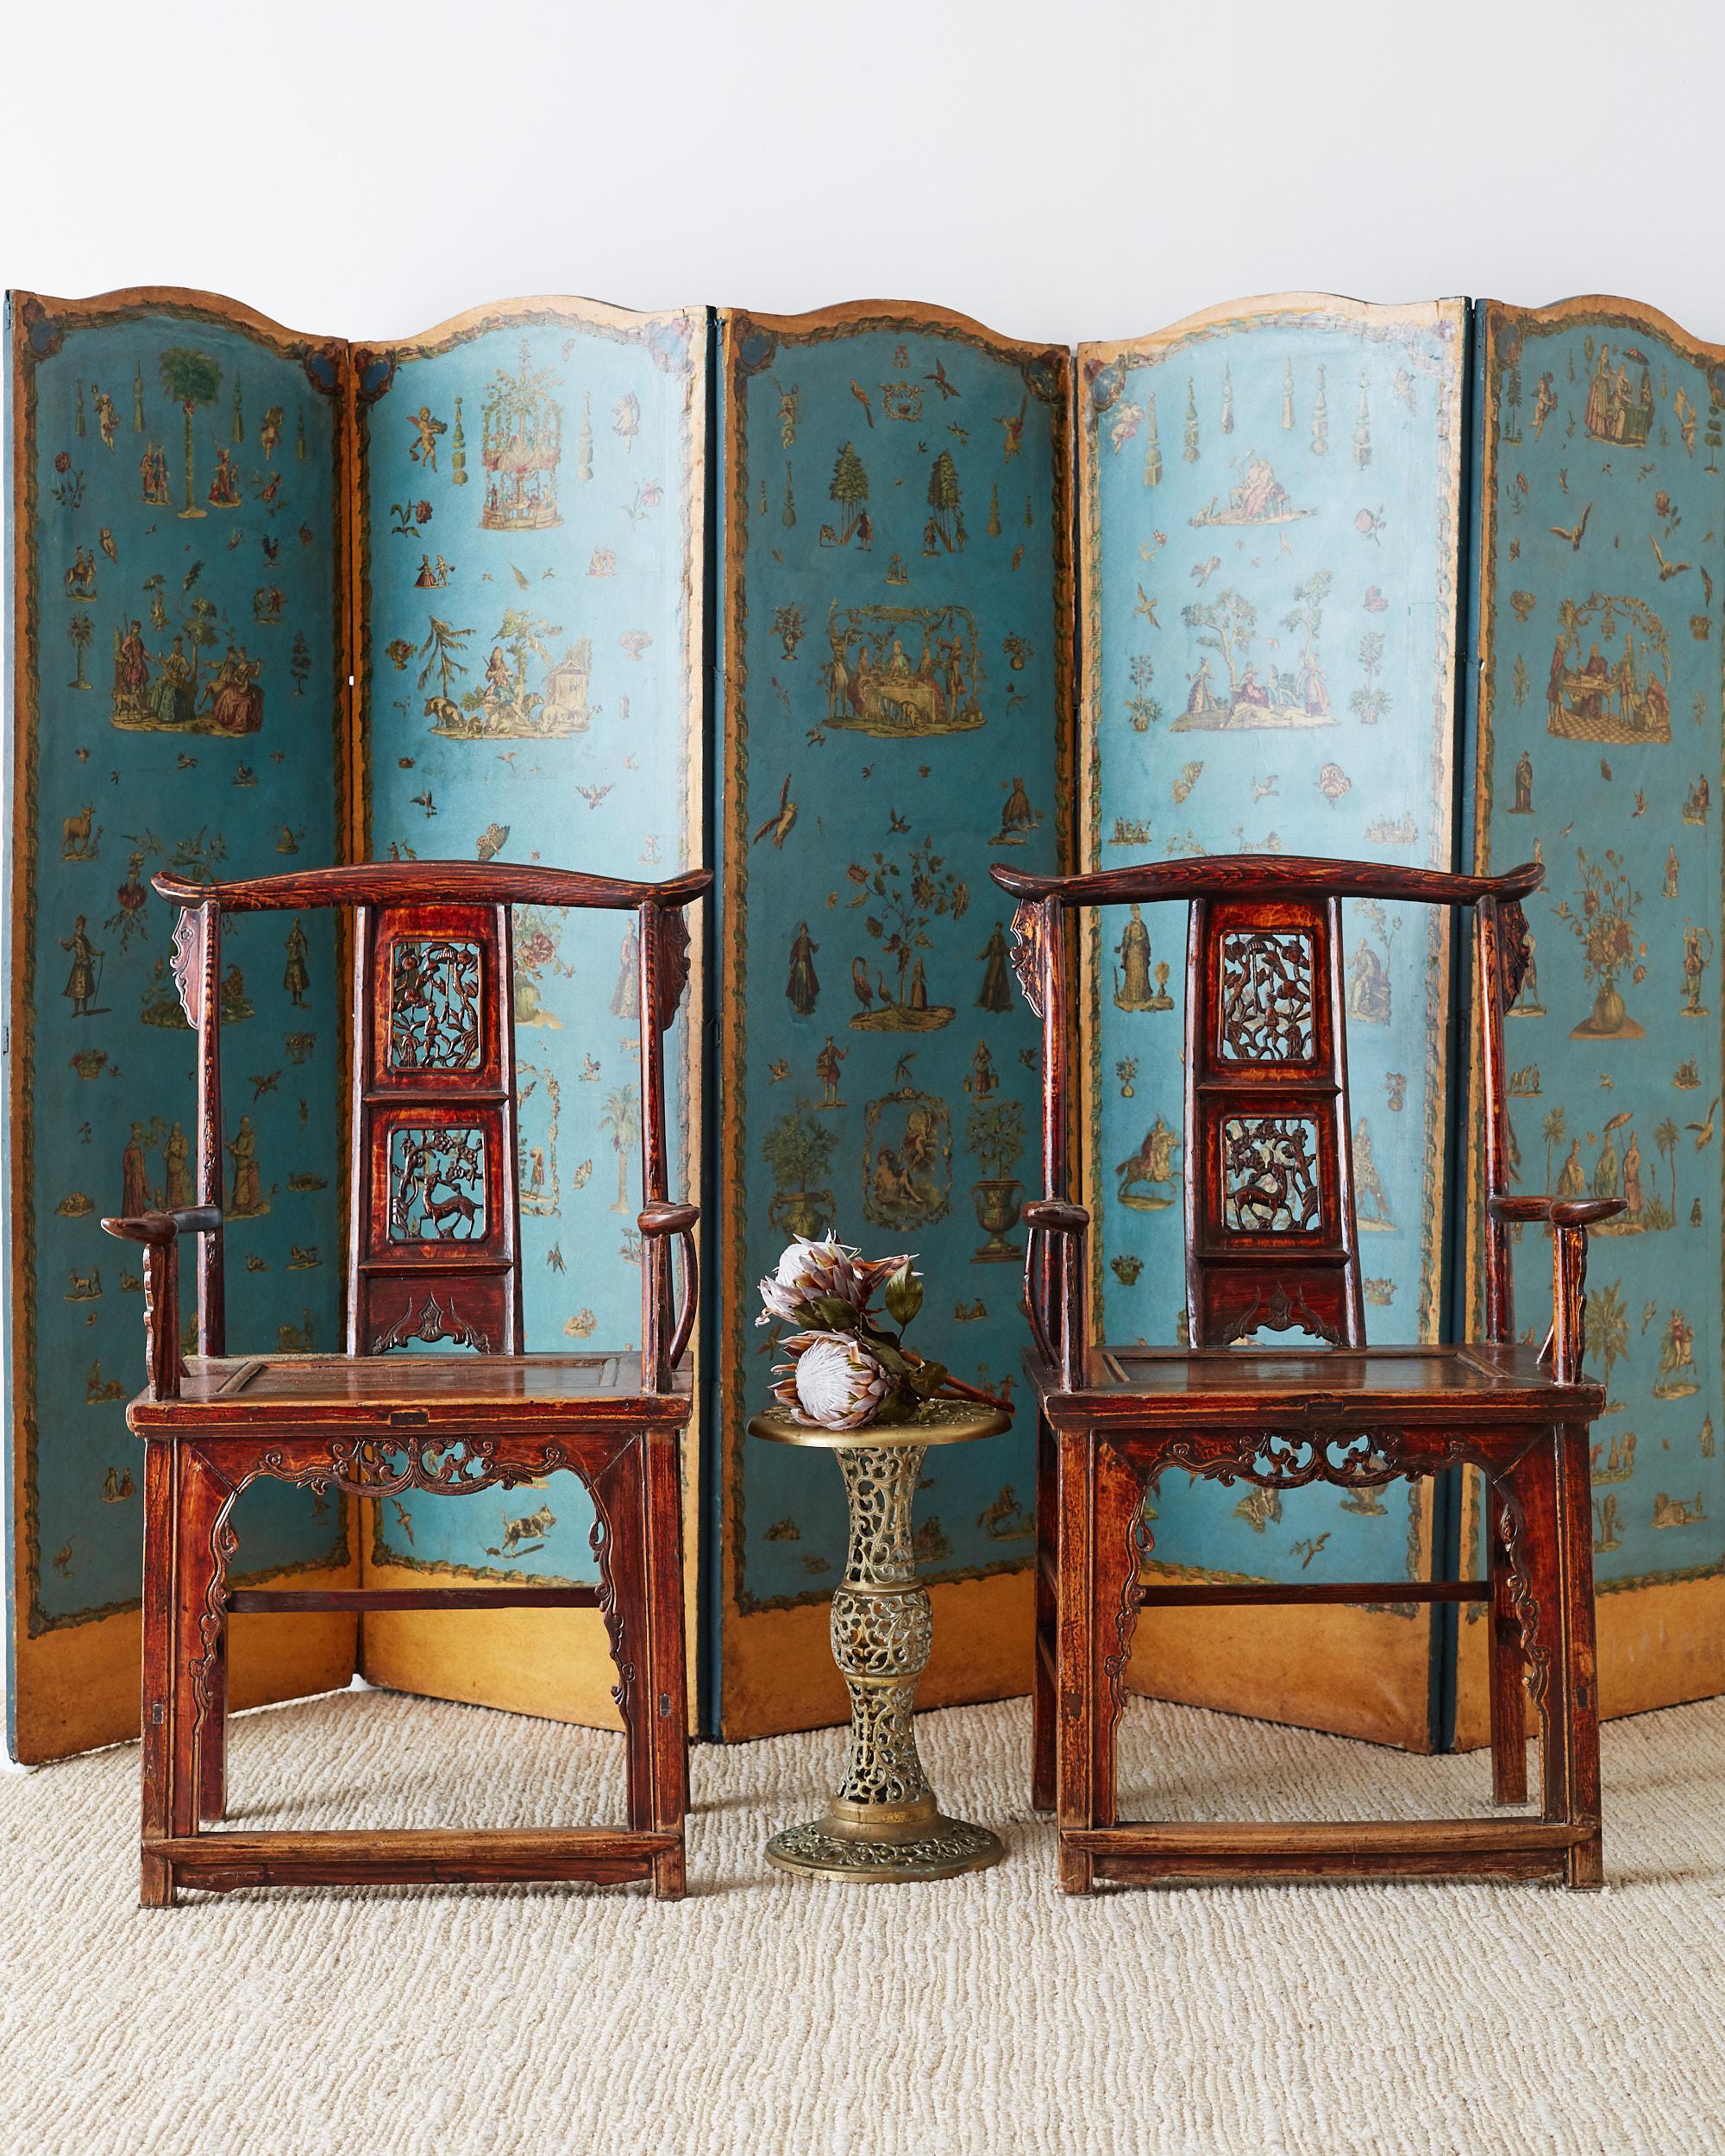 Mesmerizing 19th century French decoupage decorated six panel folding screen made in the chinoiserie revival period of the late 19th century Europe. Features French provincial toile de jouy style scenes as well as far east oriental characters and